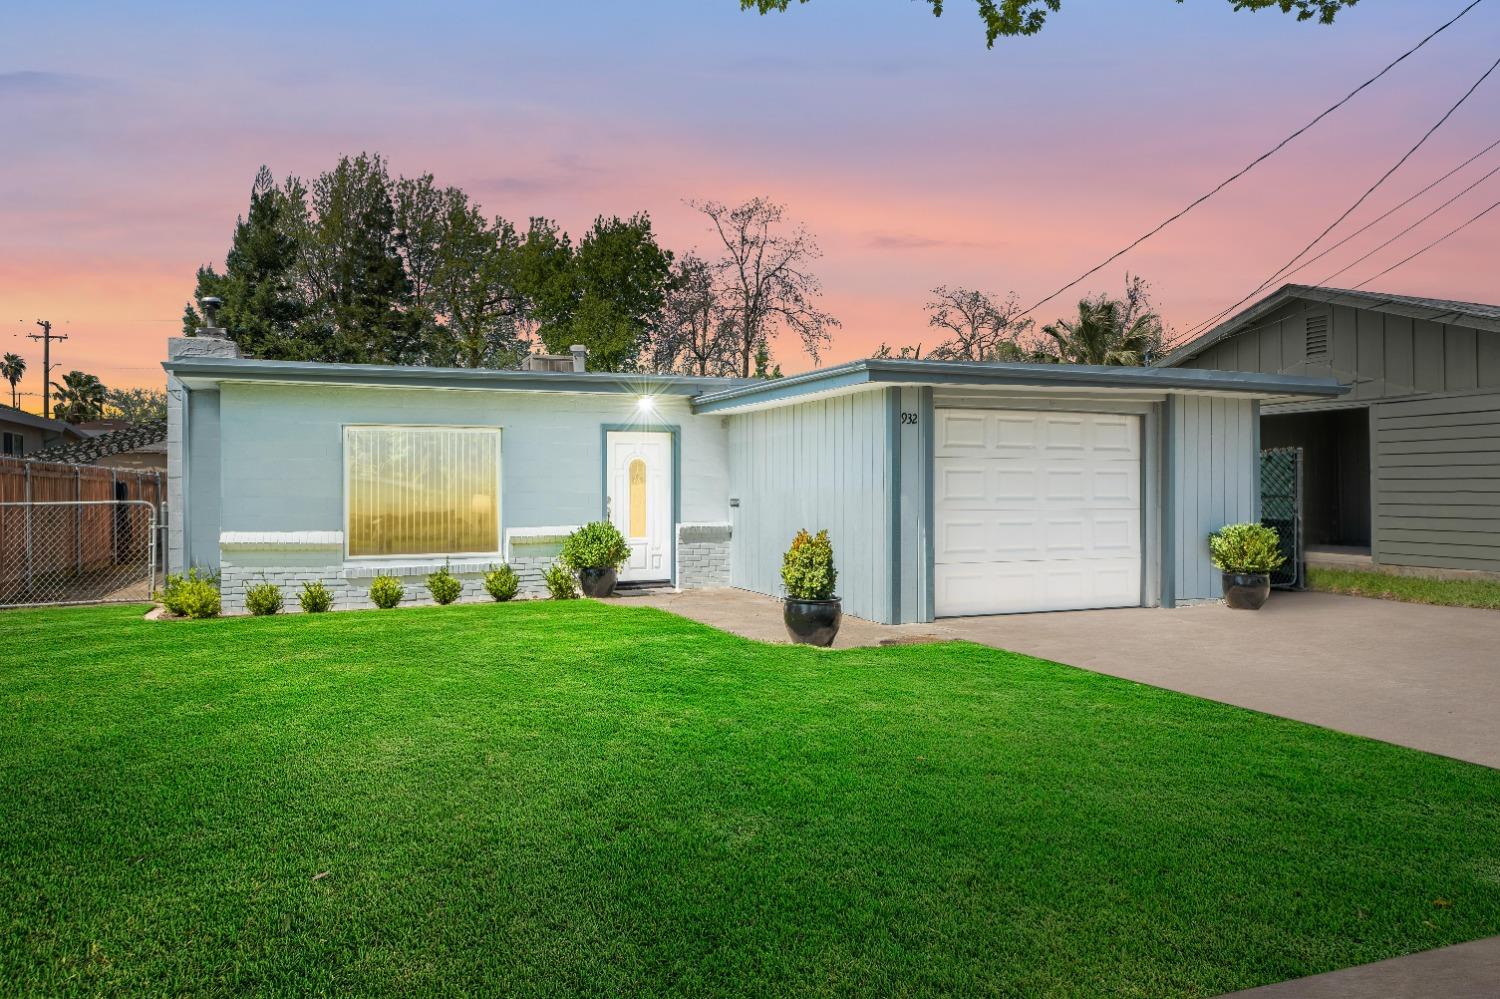 Welcome Home to 932 Circuit Drive in the heart of Roseville